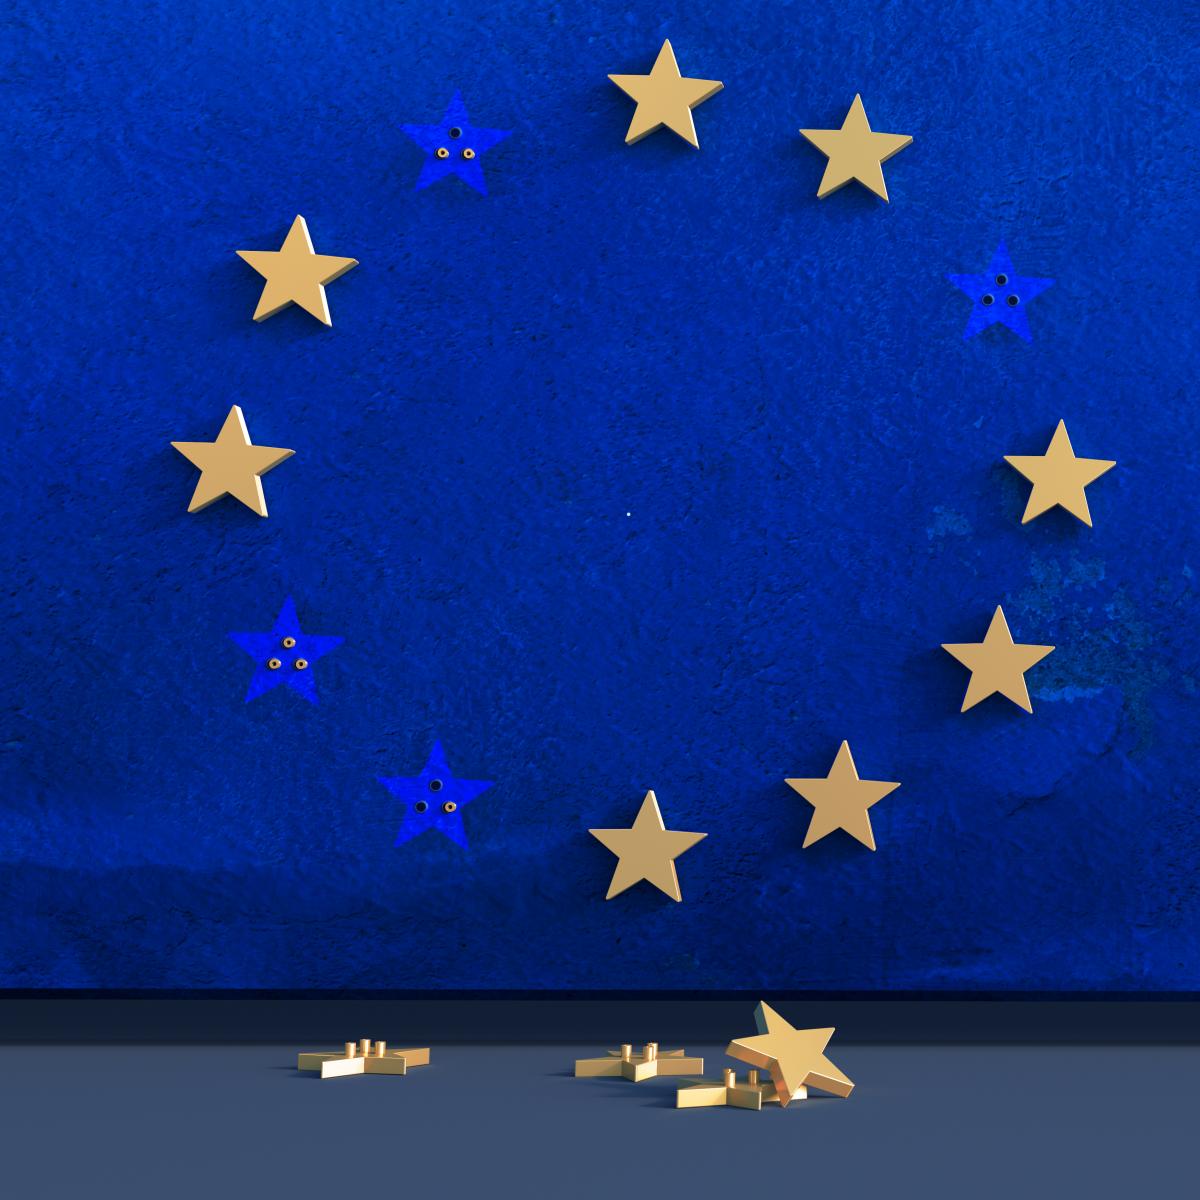 Three Reasons Why the Eurozone Recovery Will Be Poor